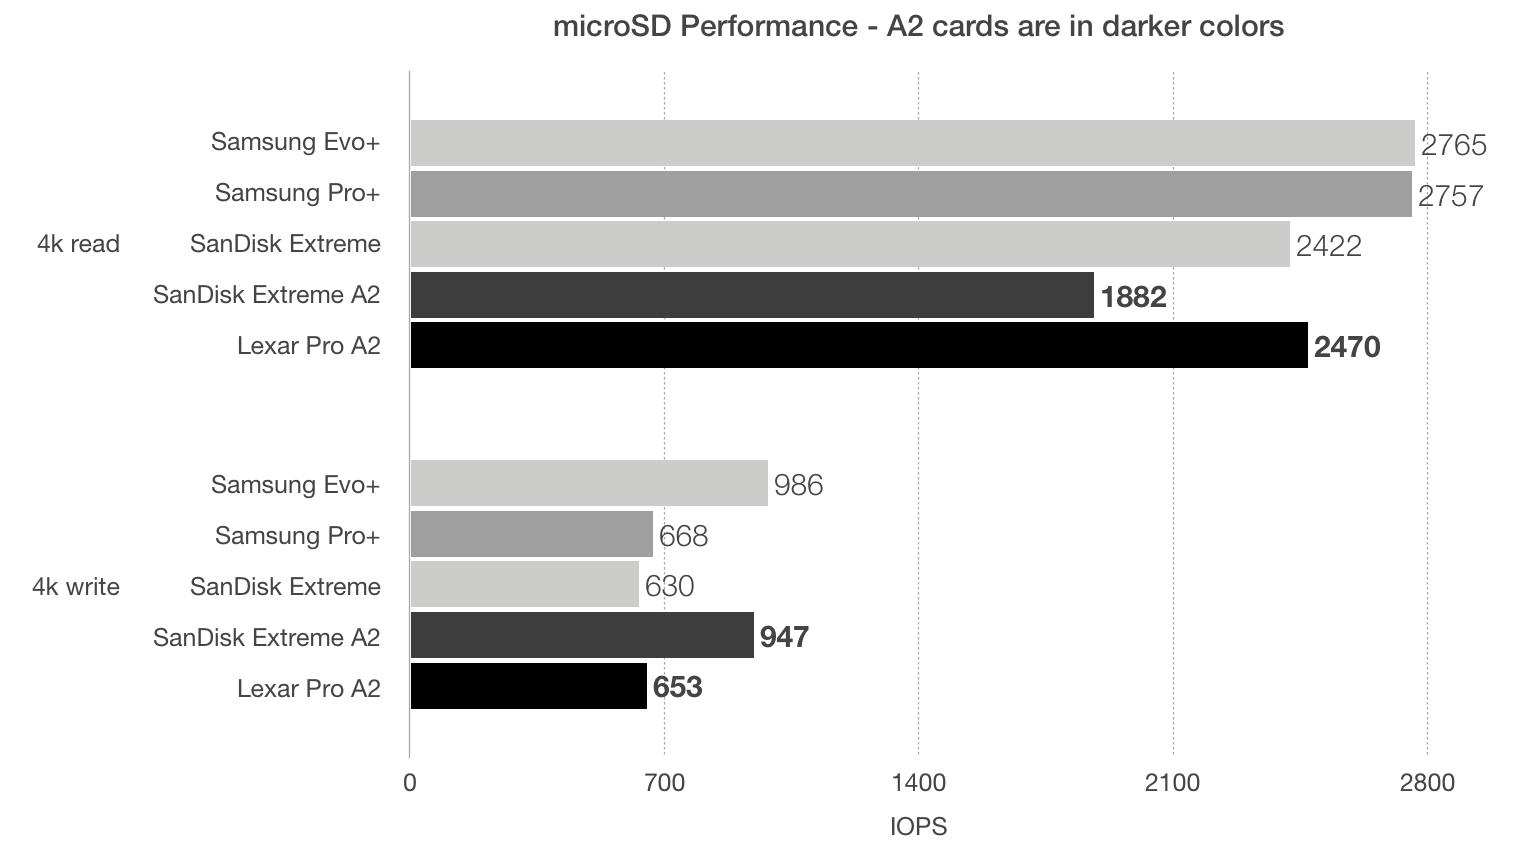 A2 Application Performance class microSD cards compared to older non-A1 cards